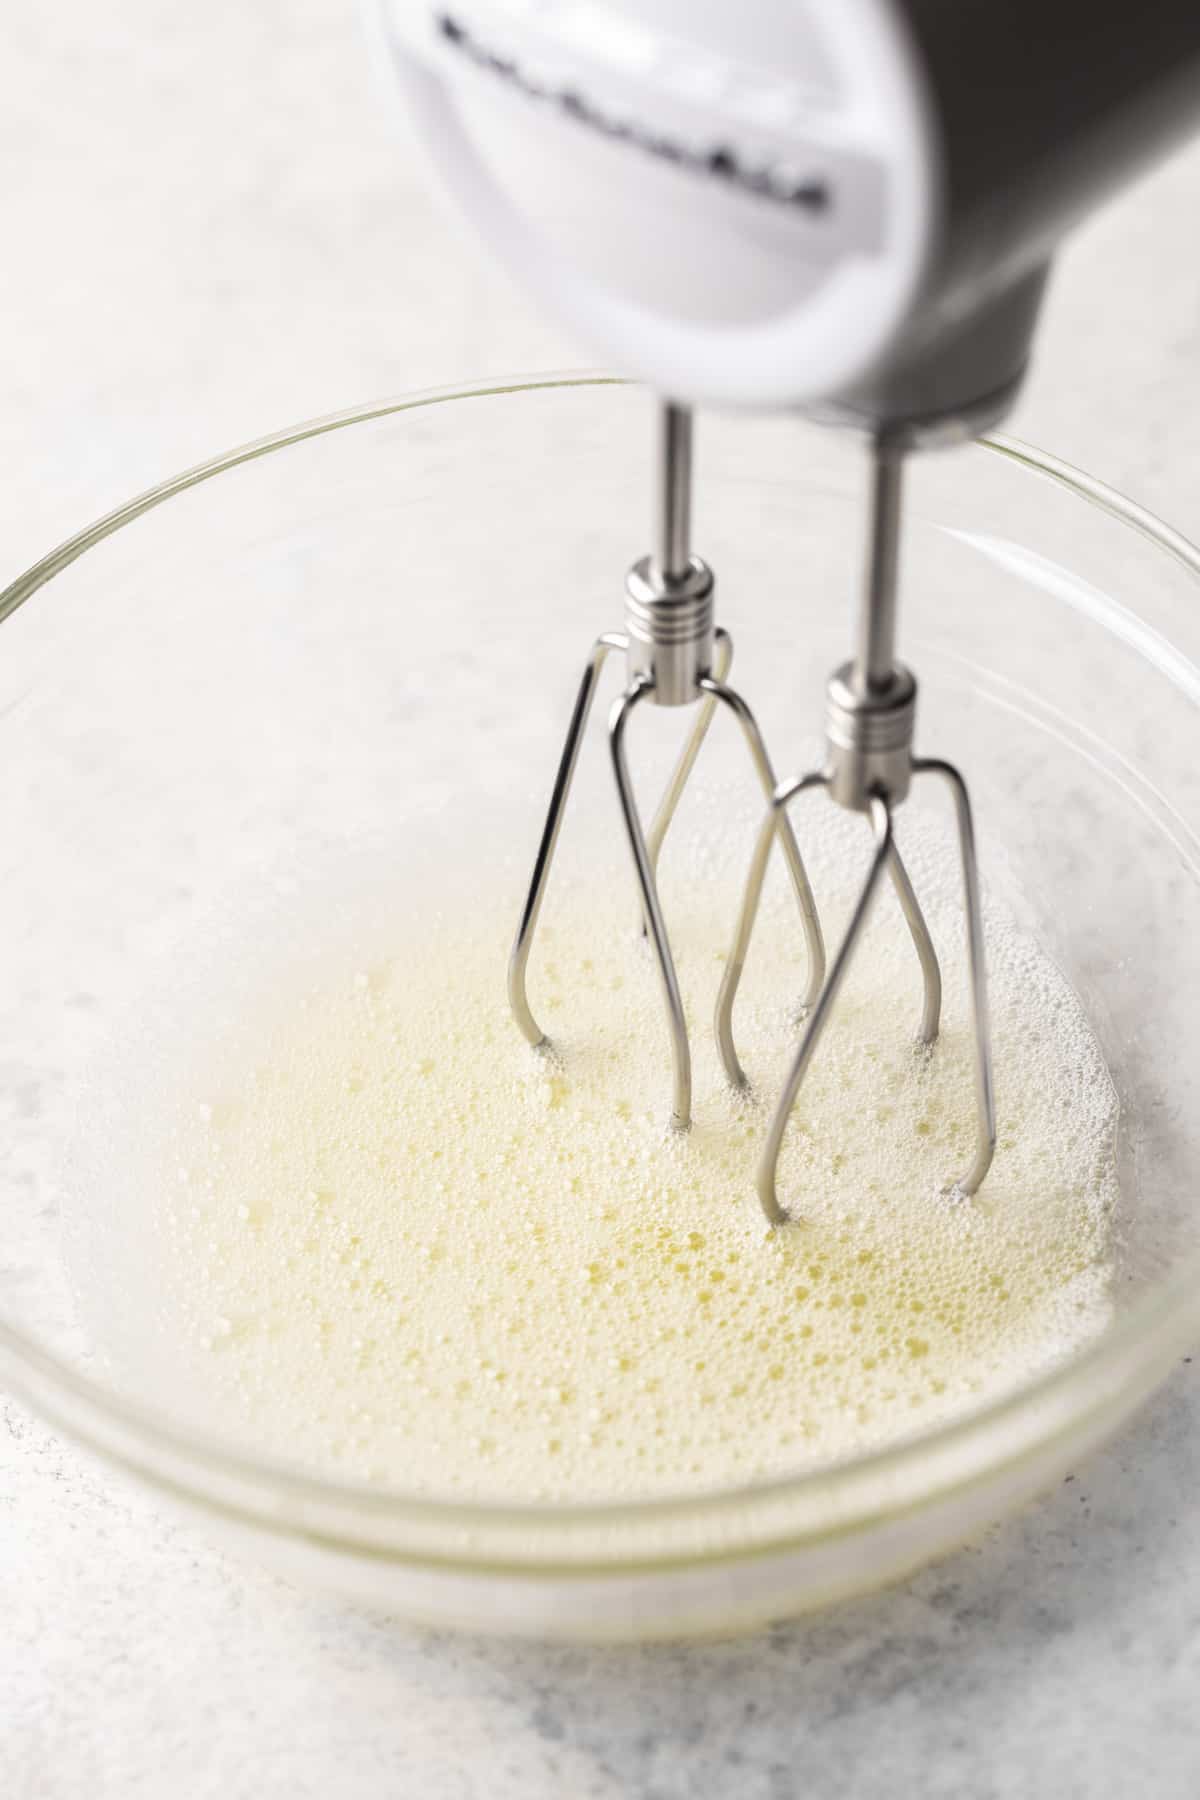 Frothy egg whites being mixed with a hand mixer.